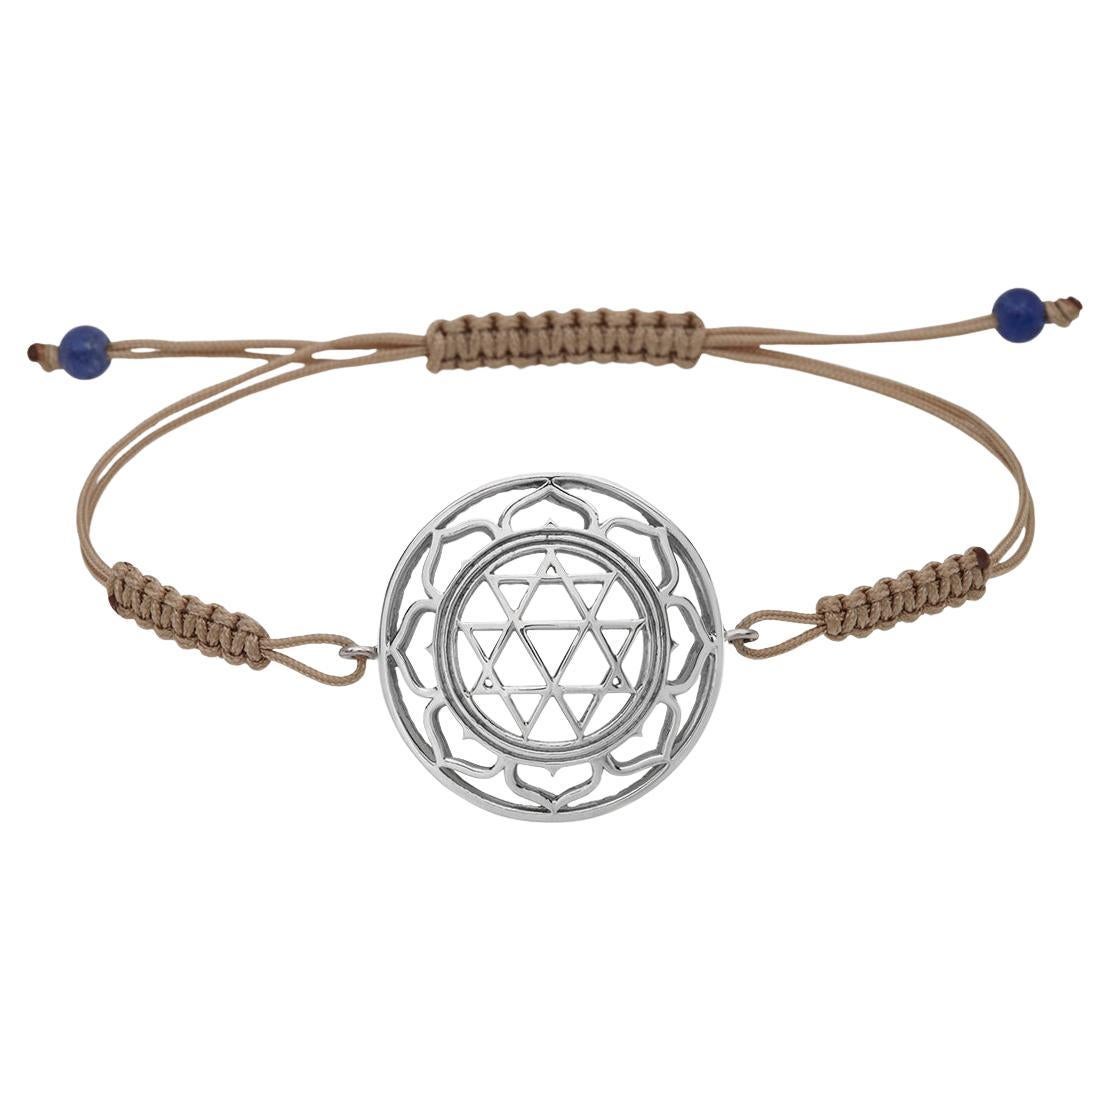 Durga Yantra Macrame Bracelet in 14Kt White Gold with Brown Cord Spiritual Gift For Sale